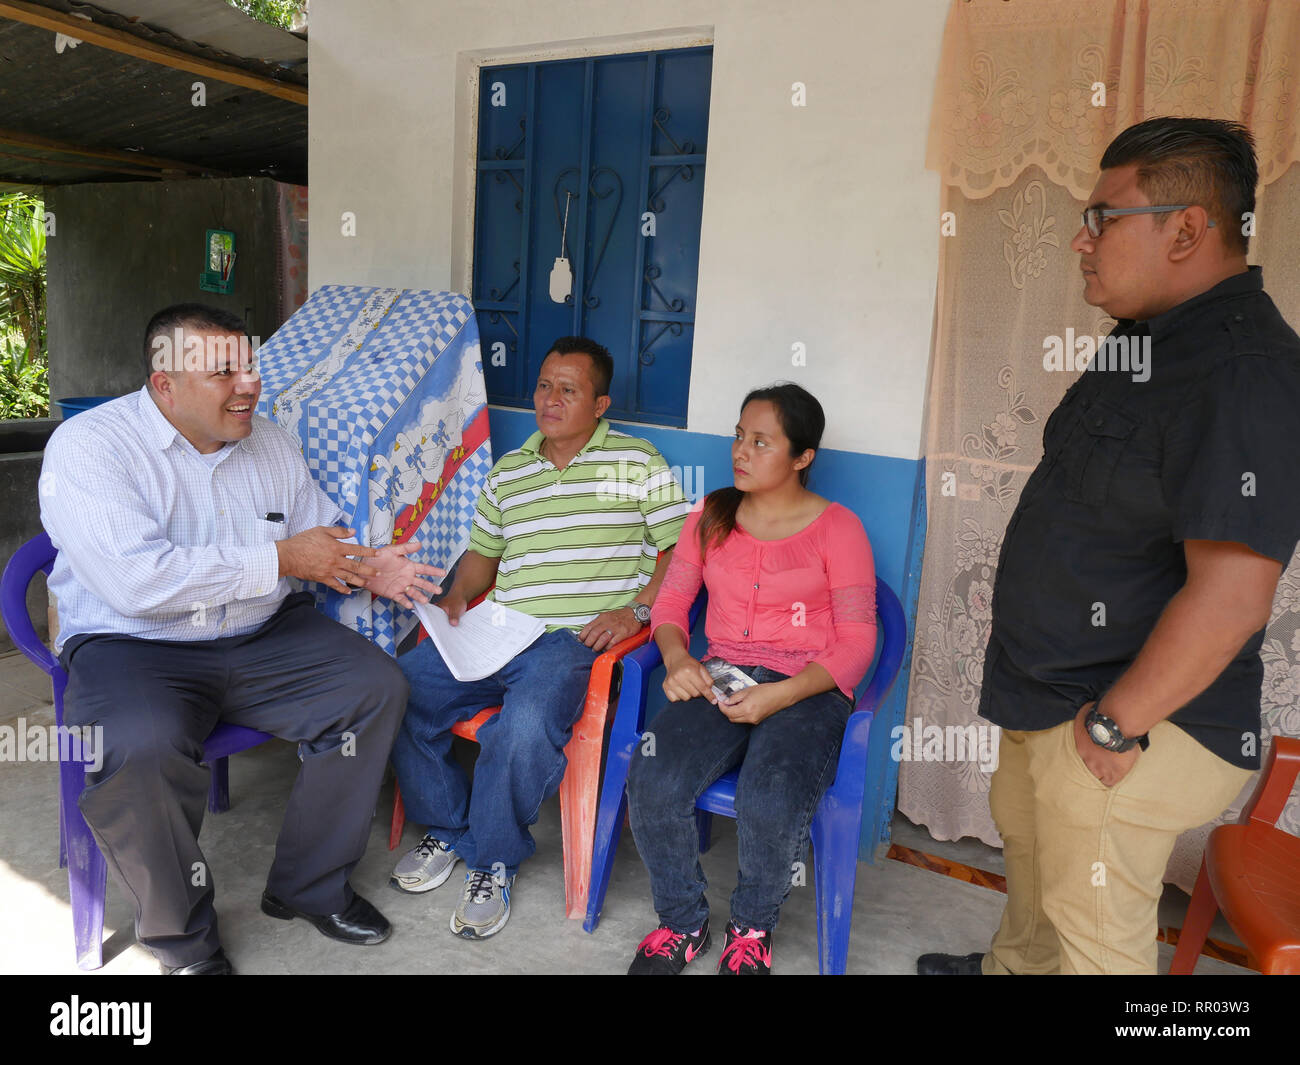 EL SALVADOR  Santos Pastor Paulino, 43, with his daughter Alexandra Yamileth, 20, at their home near Cuscatlan, being visited by Luis Lopez of COFAMIDE and Santiago Salinas of SEAL. Stock Photo